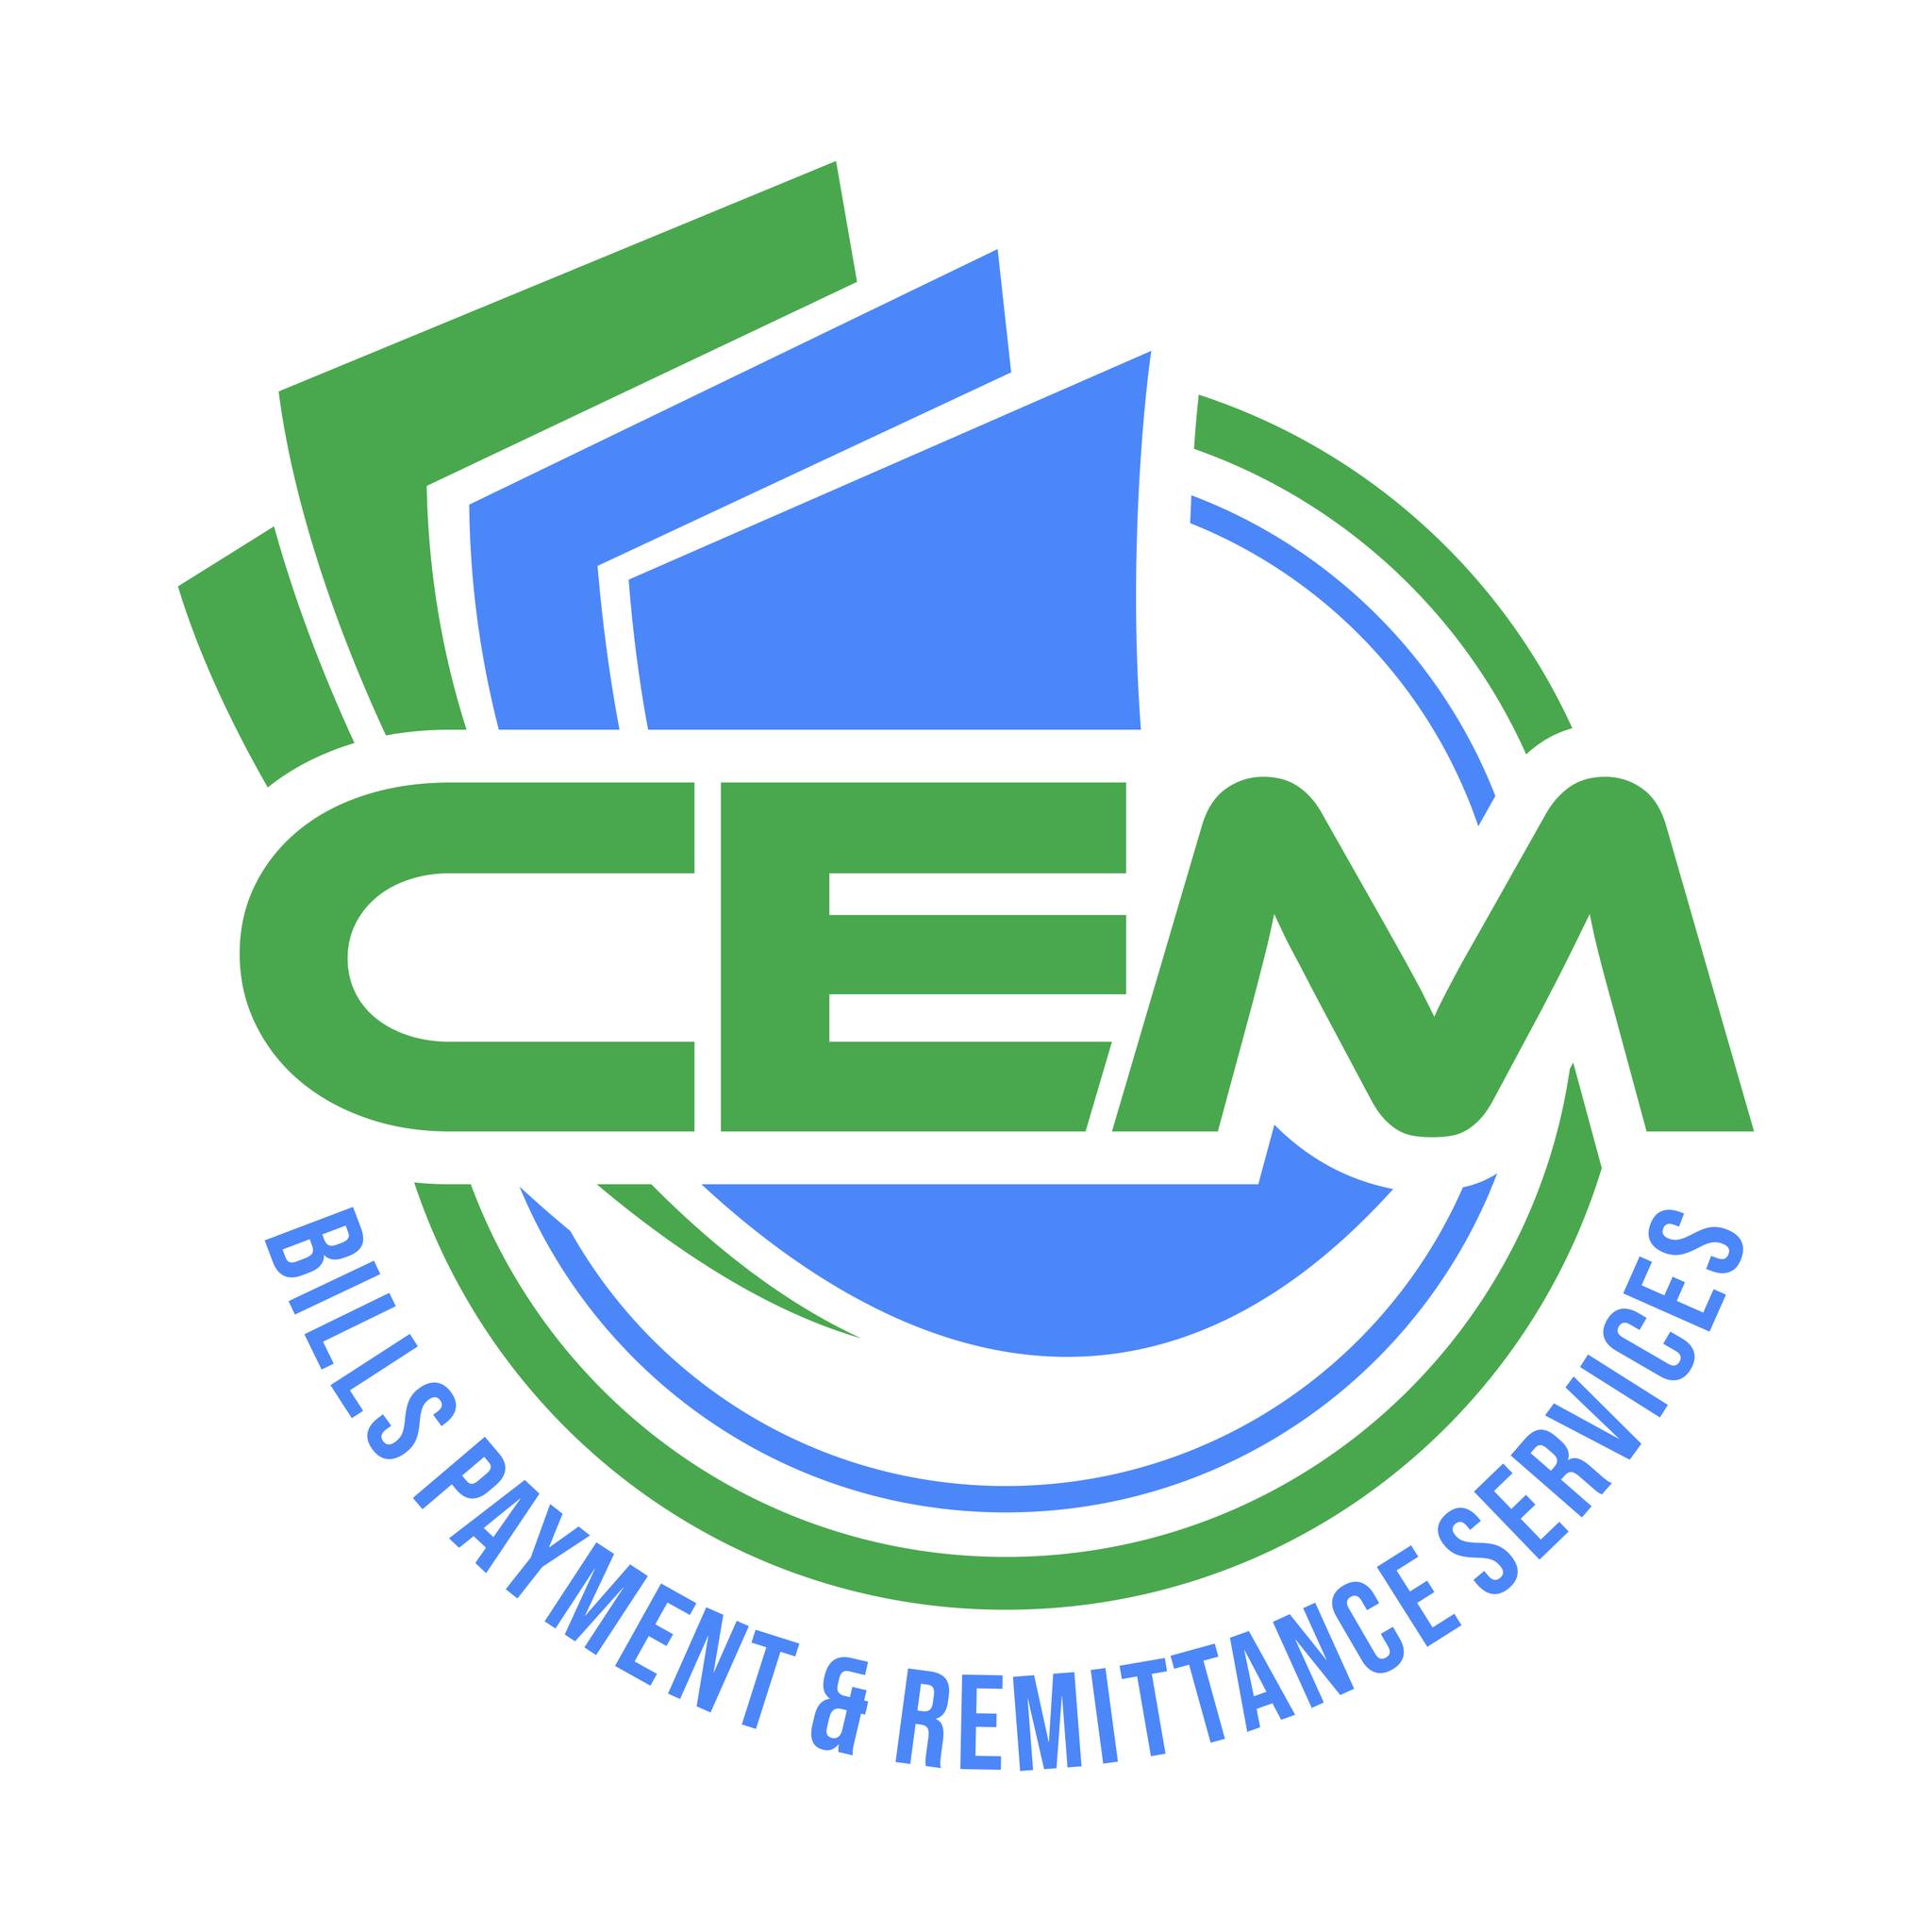 CEM BILLS PAYMENT AND REMITTANCE SERVICES LOGO